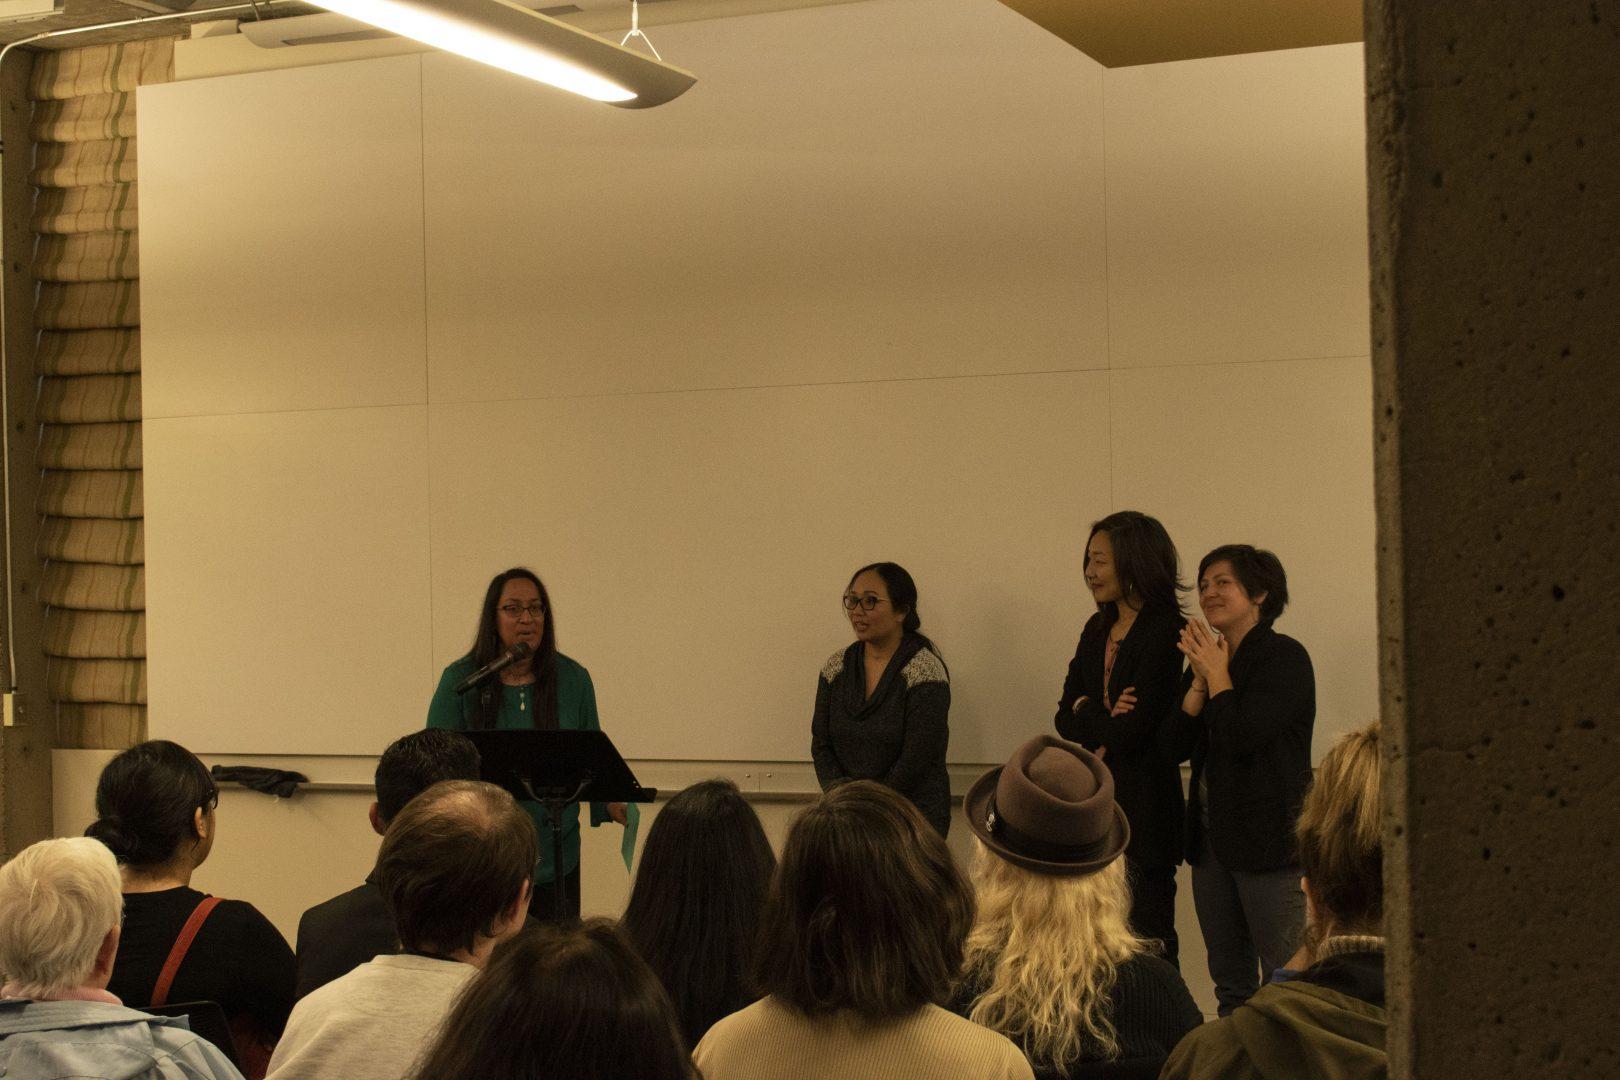 Storytelling for Change fellowship presents personal stories about overcoming racism and finding one’s voice at Henry Madden Library on Saturday Feb. 9, 2019. (Payton Hartung/The Collegian)